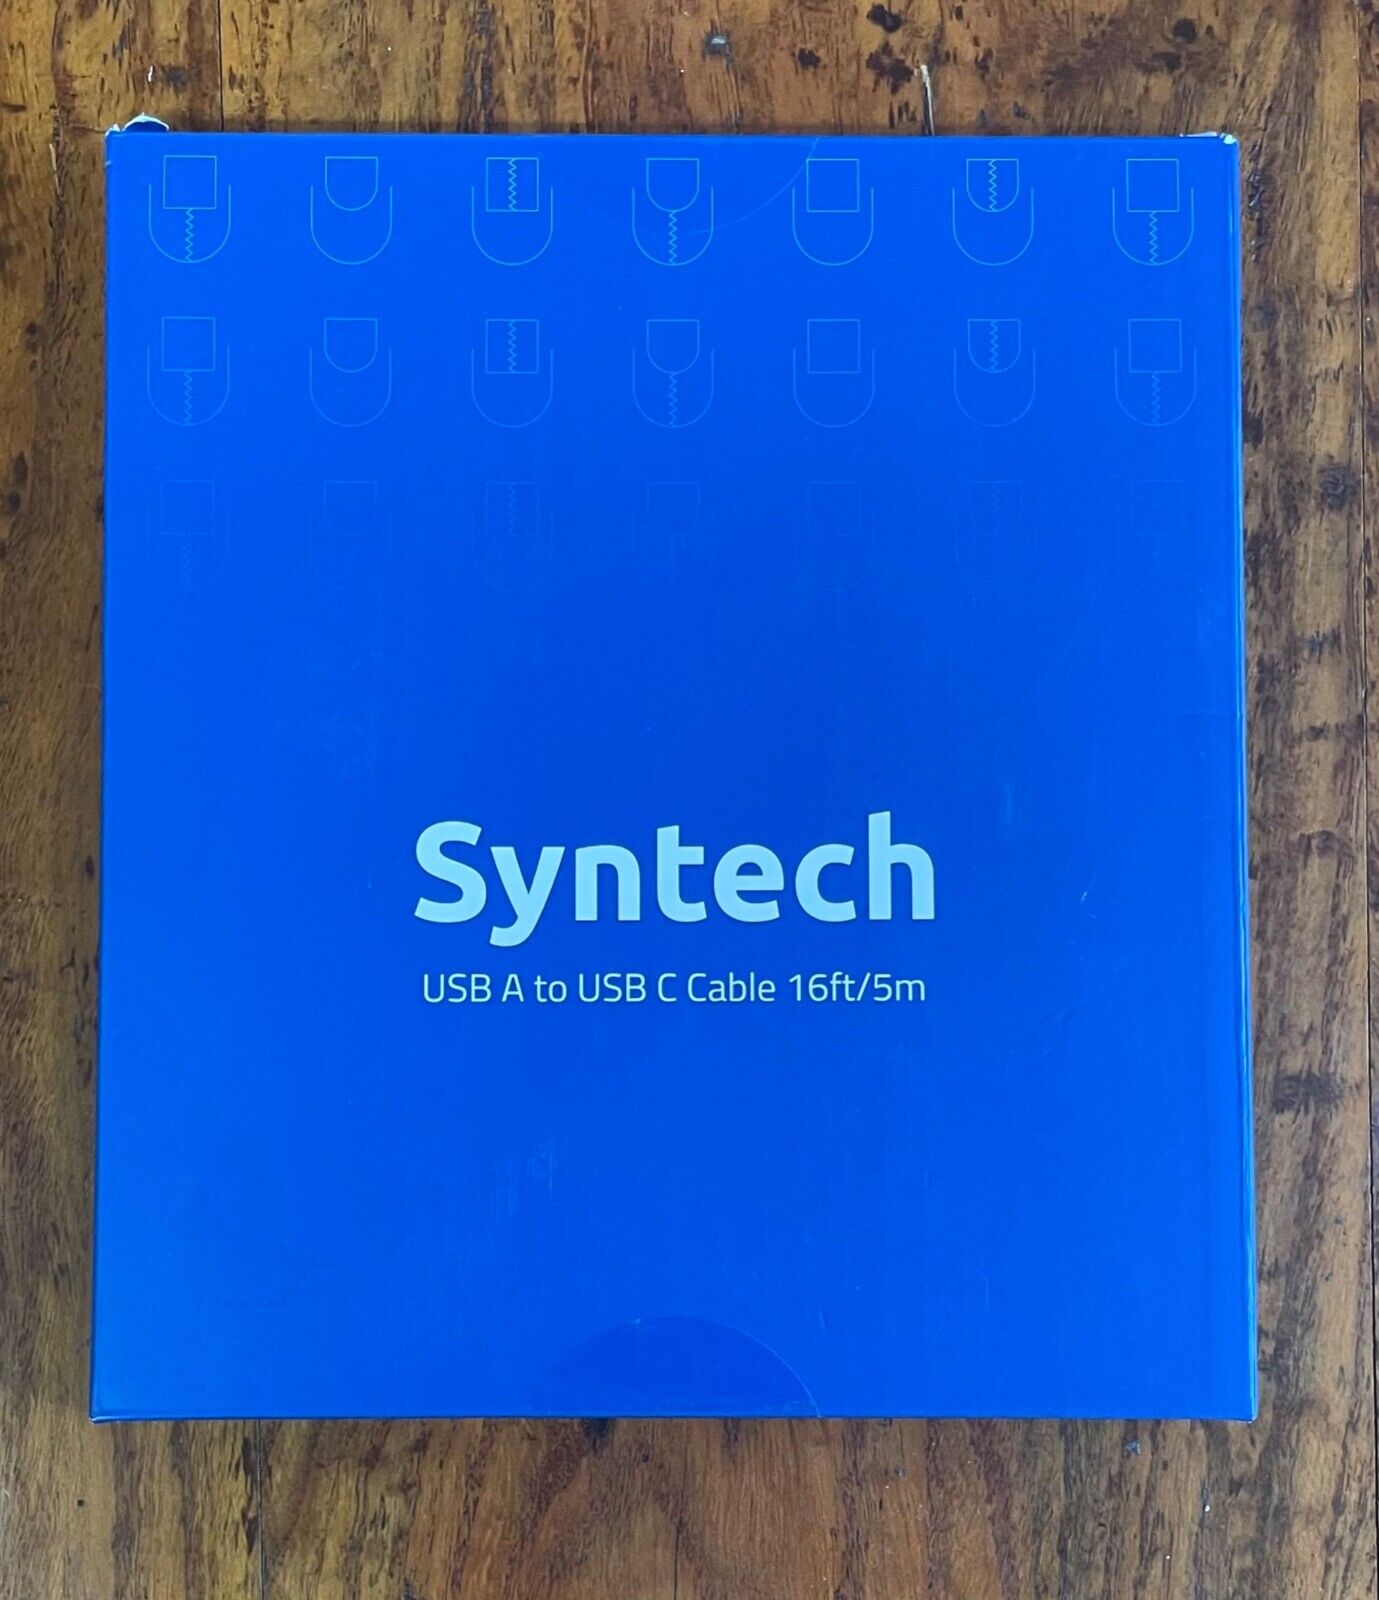 Syntech usb a to usb c cable 16ft/5m